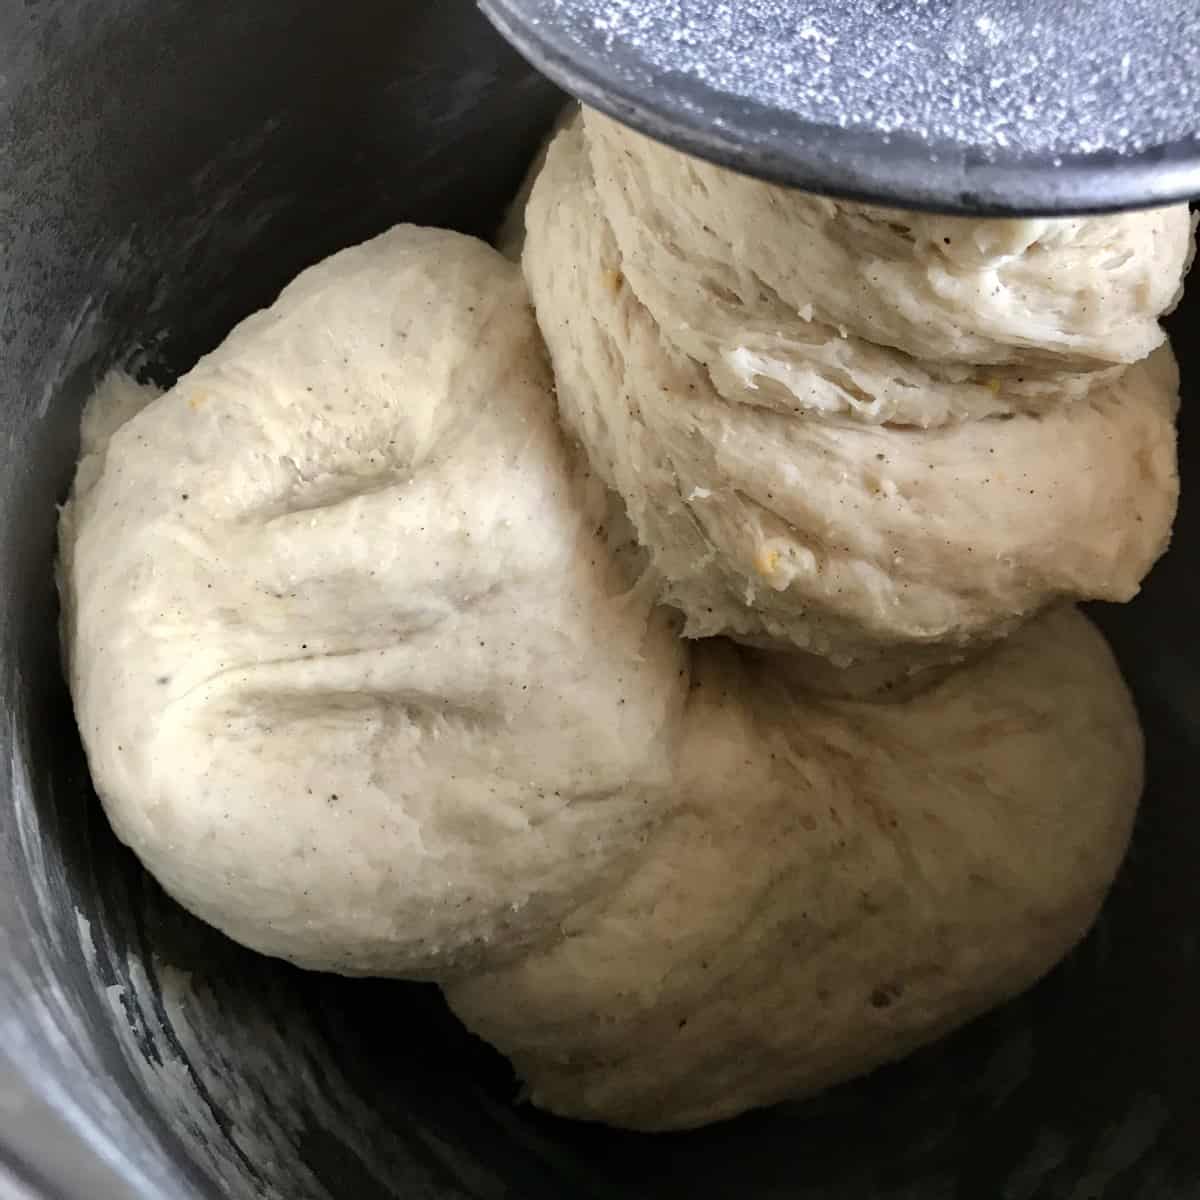 Sweet dough in the bowl of a stand mixer.